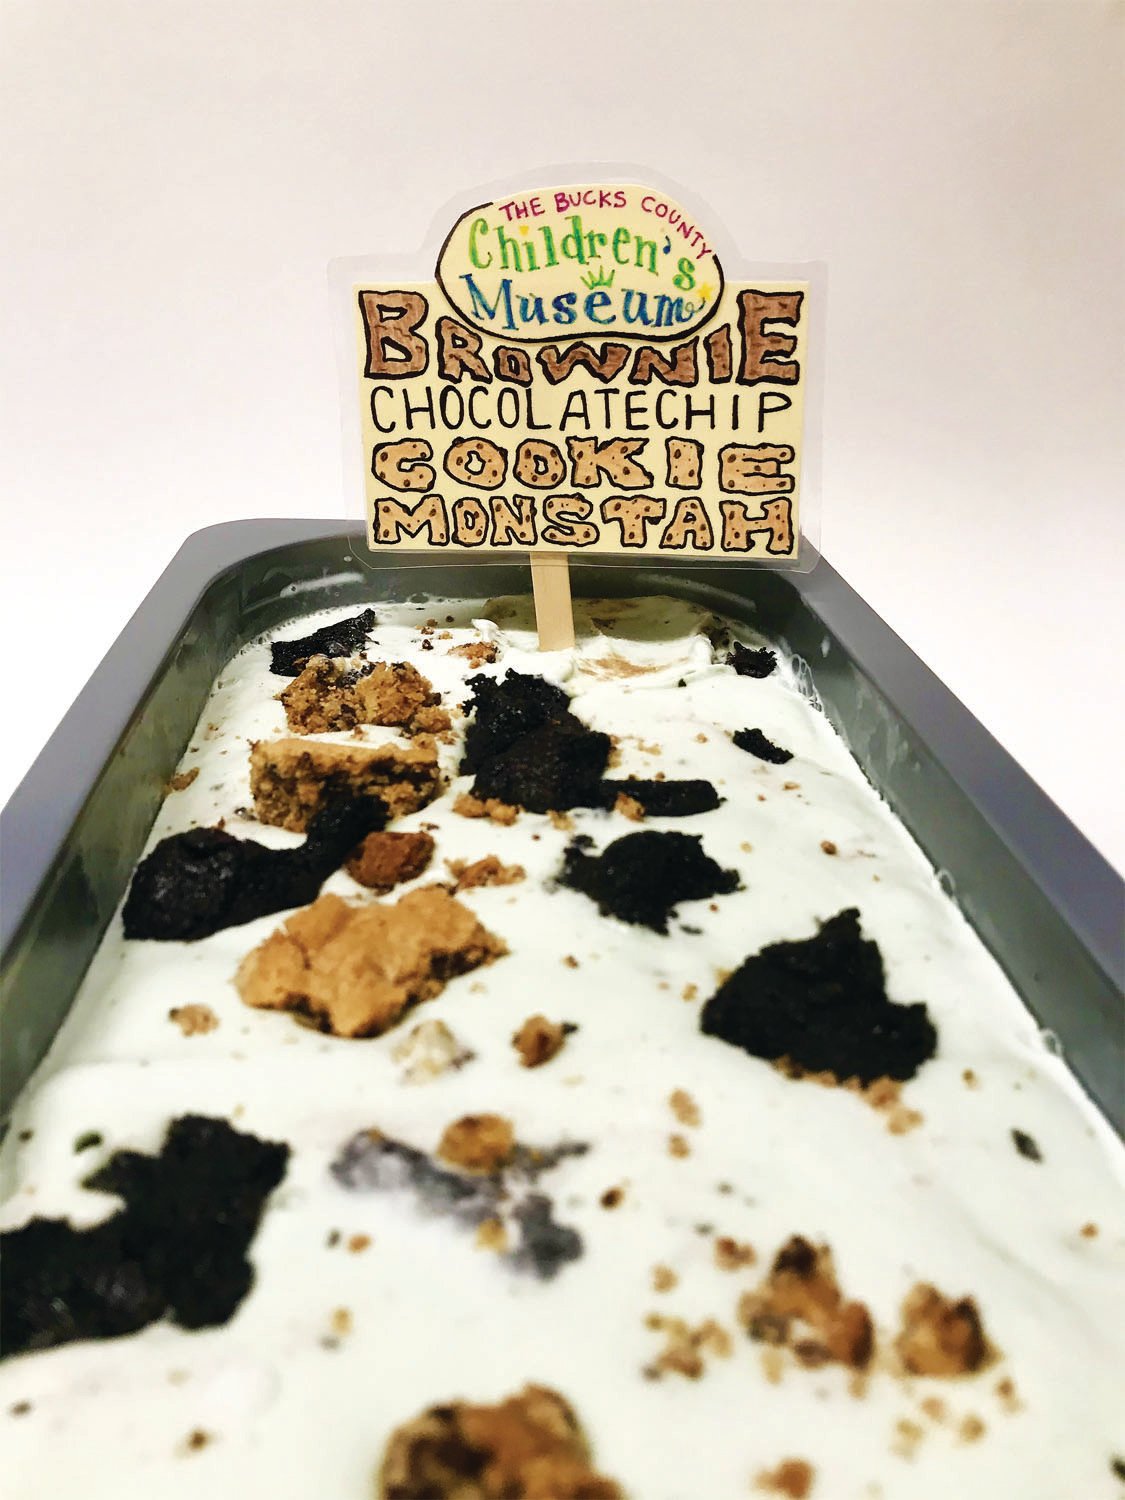 The new brownie chocolate chip cookie monstah flavor at Owowcow benefits the Children’s Museum.